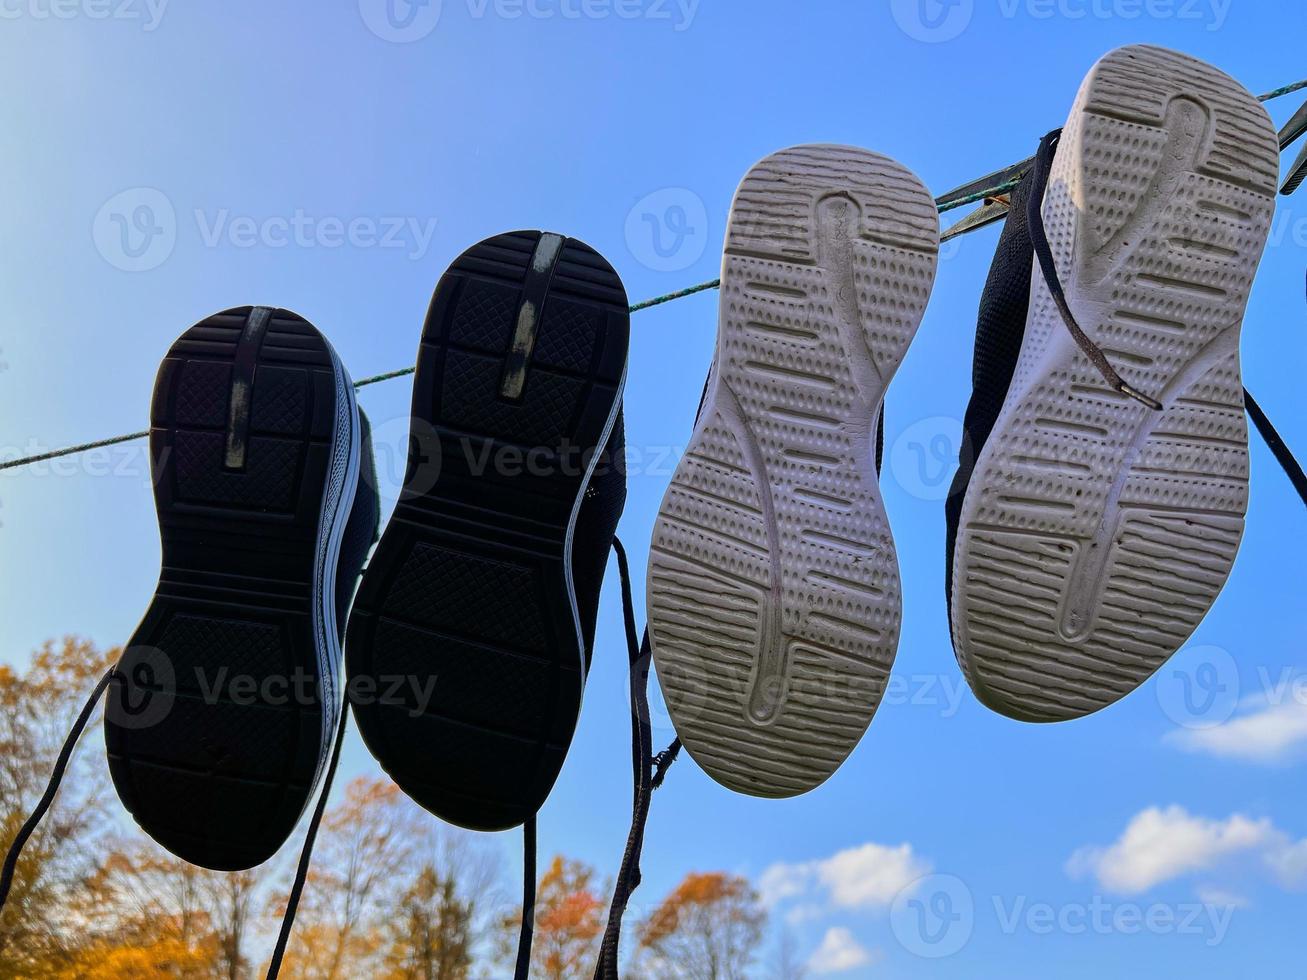 Two pairs of sneakers are drying on a clothesline against a blue sky. photo